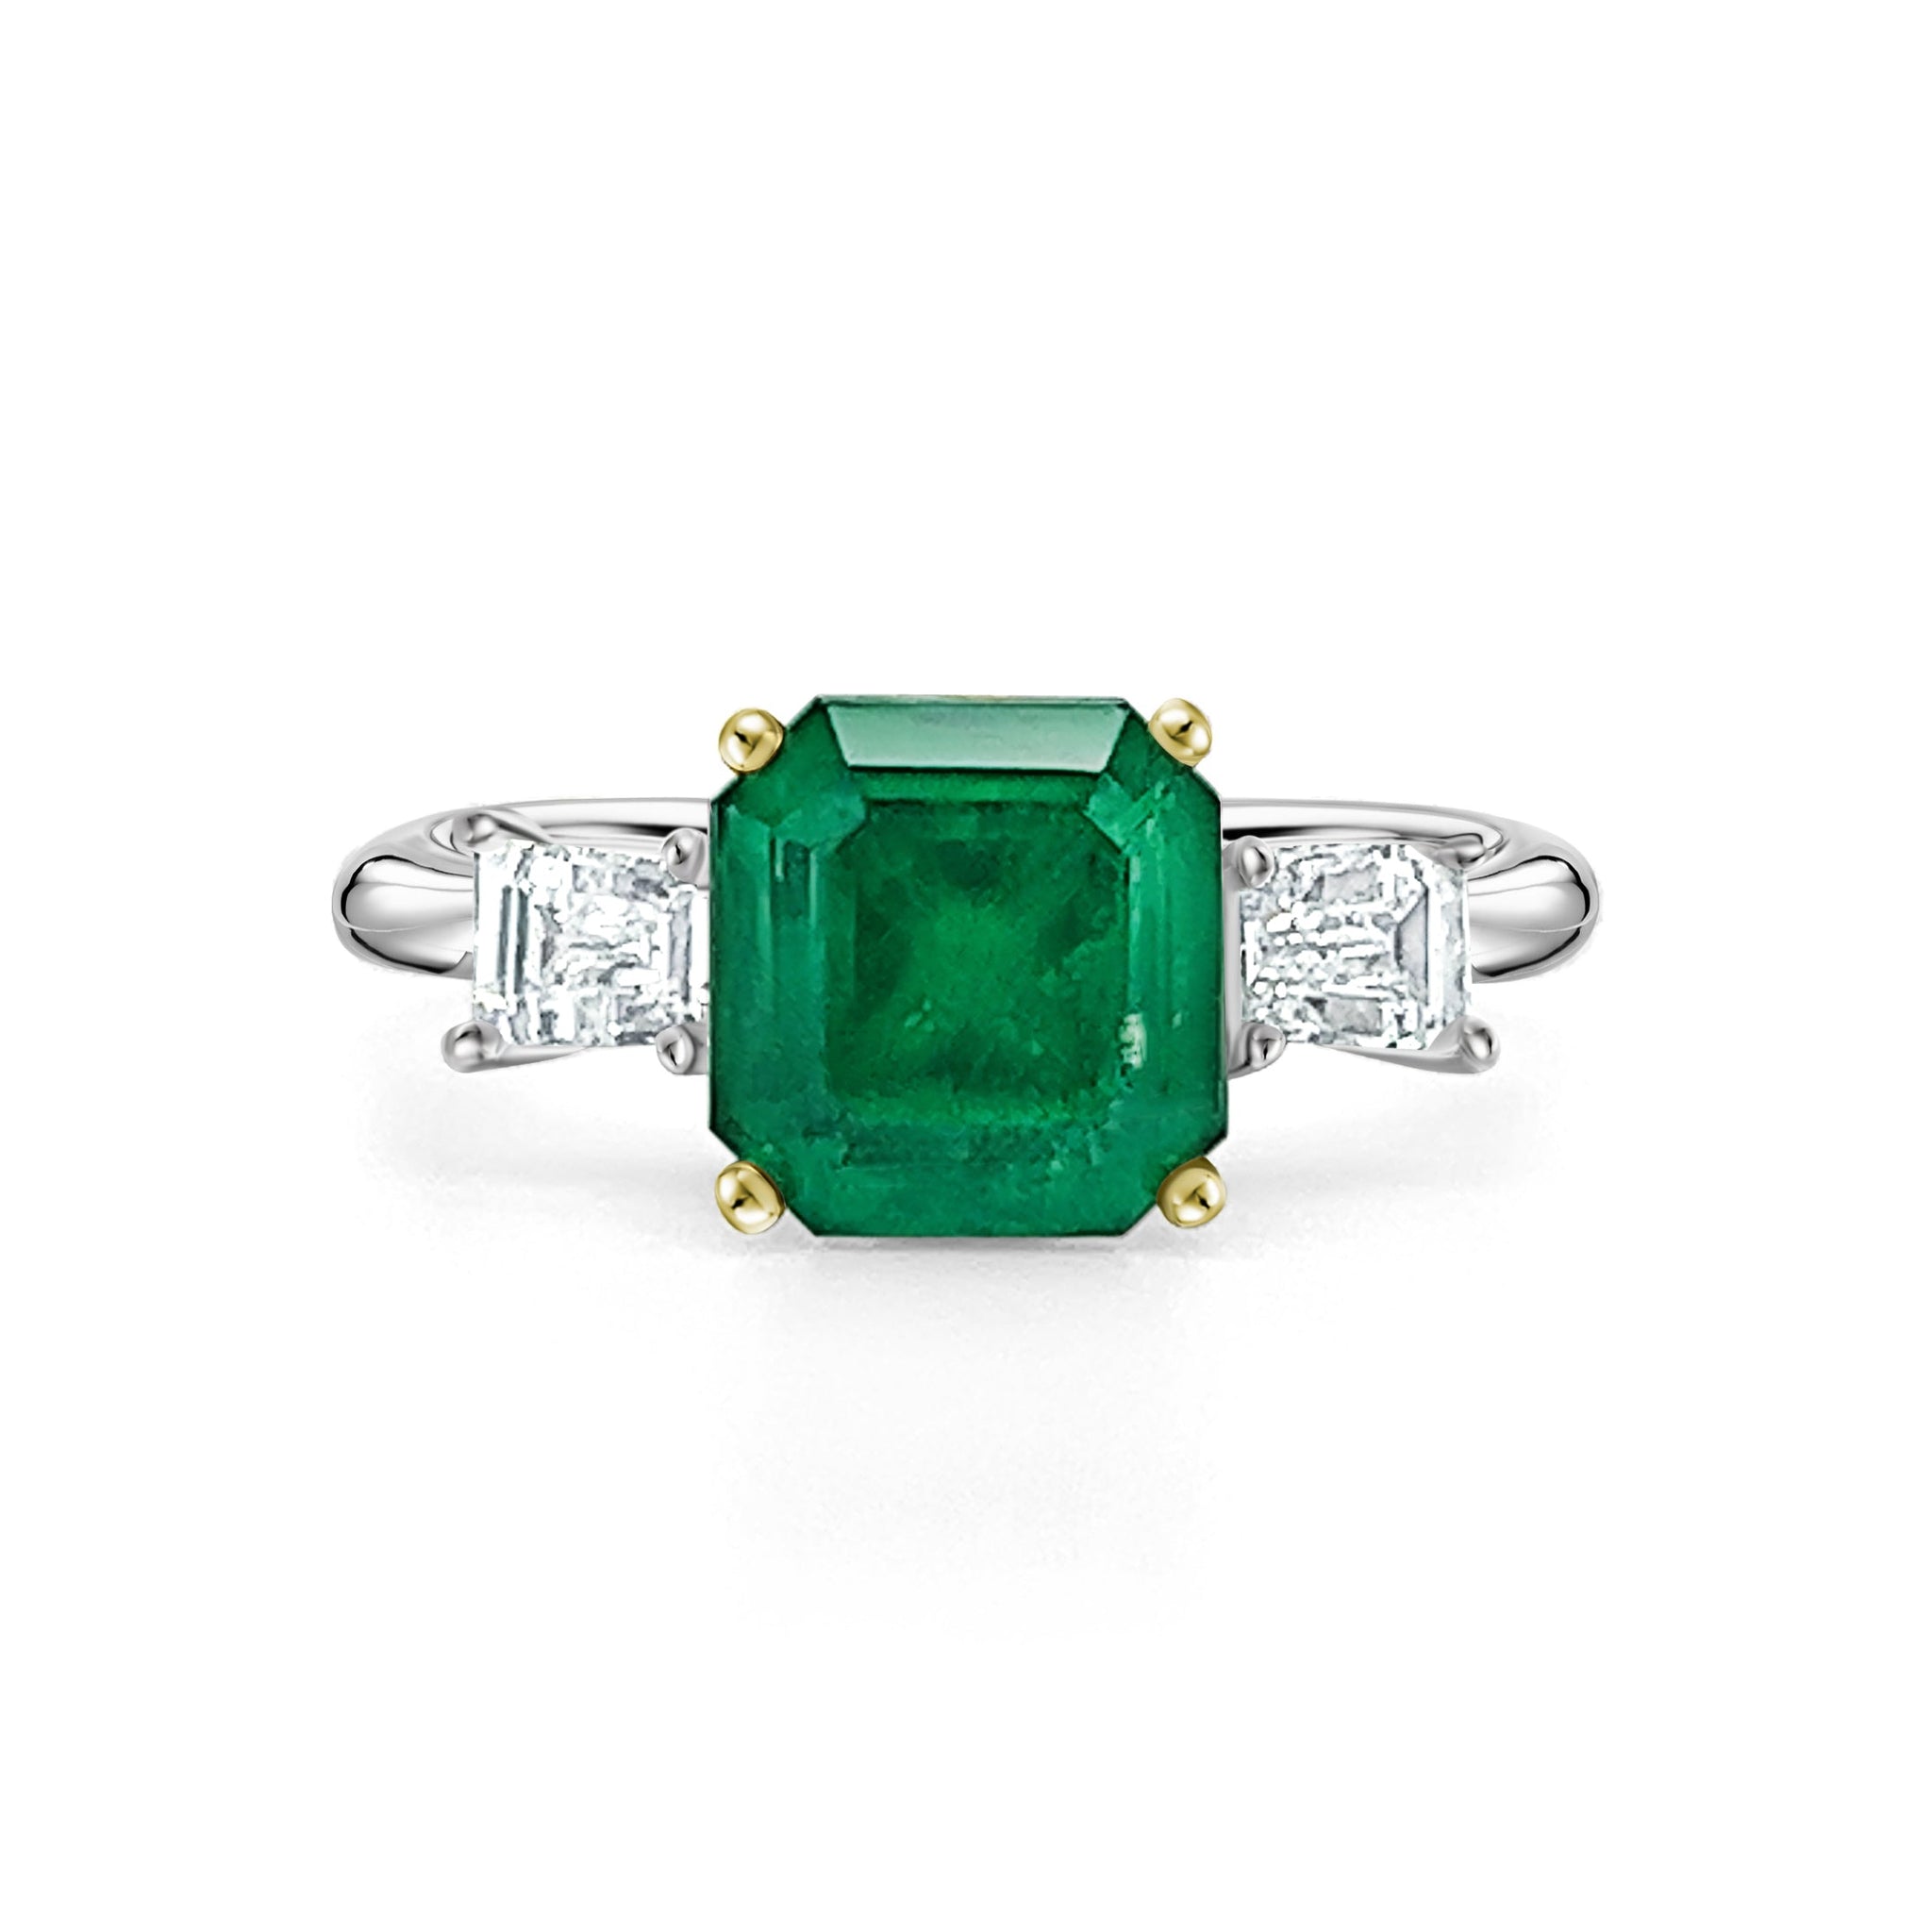 2.19 Carat Natural Emerald 3-Stone Ring with Baguette Diamond in 18K White Gold